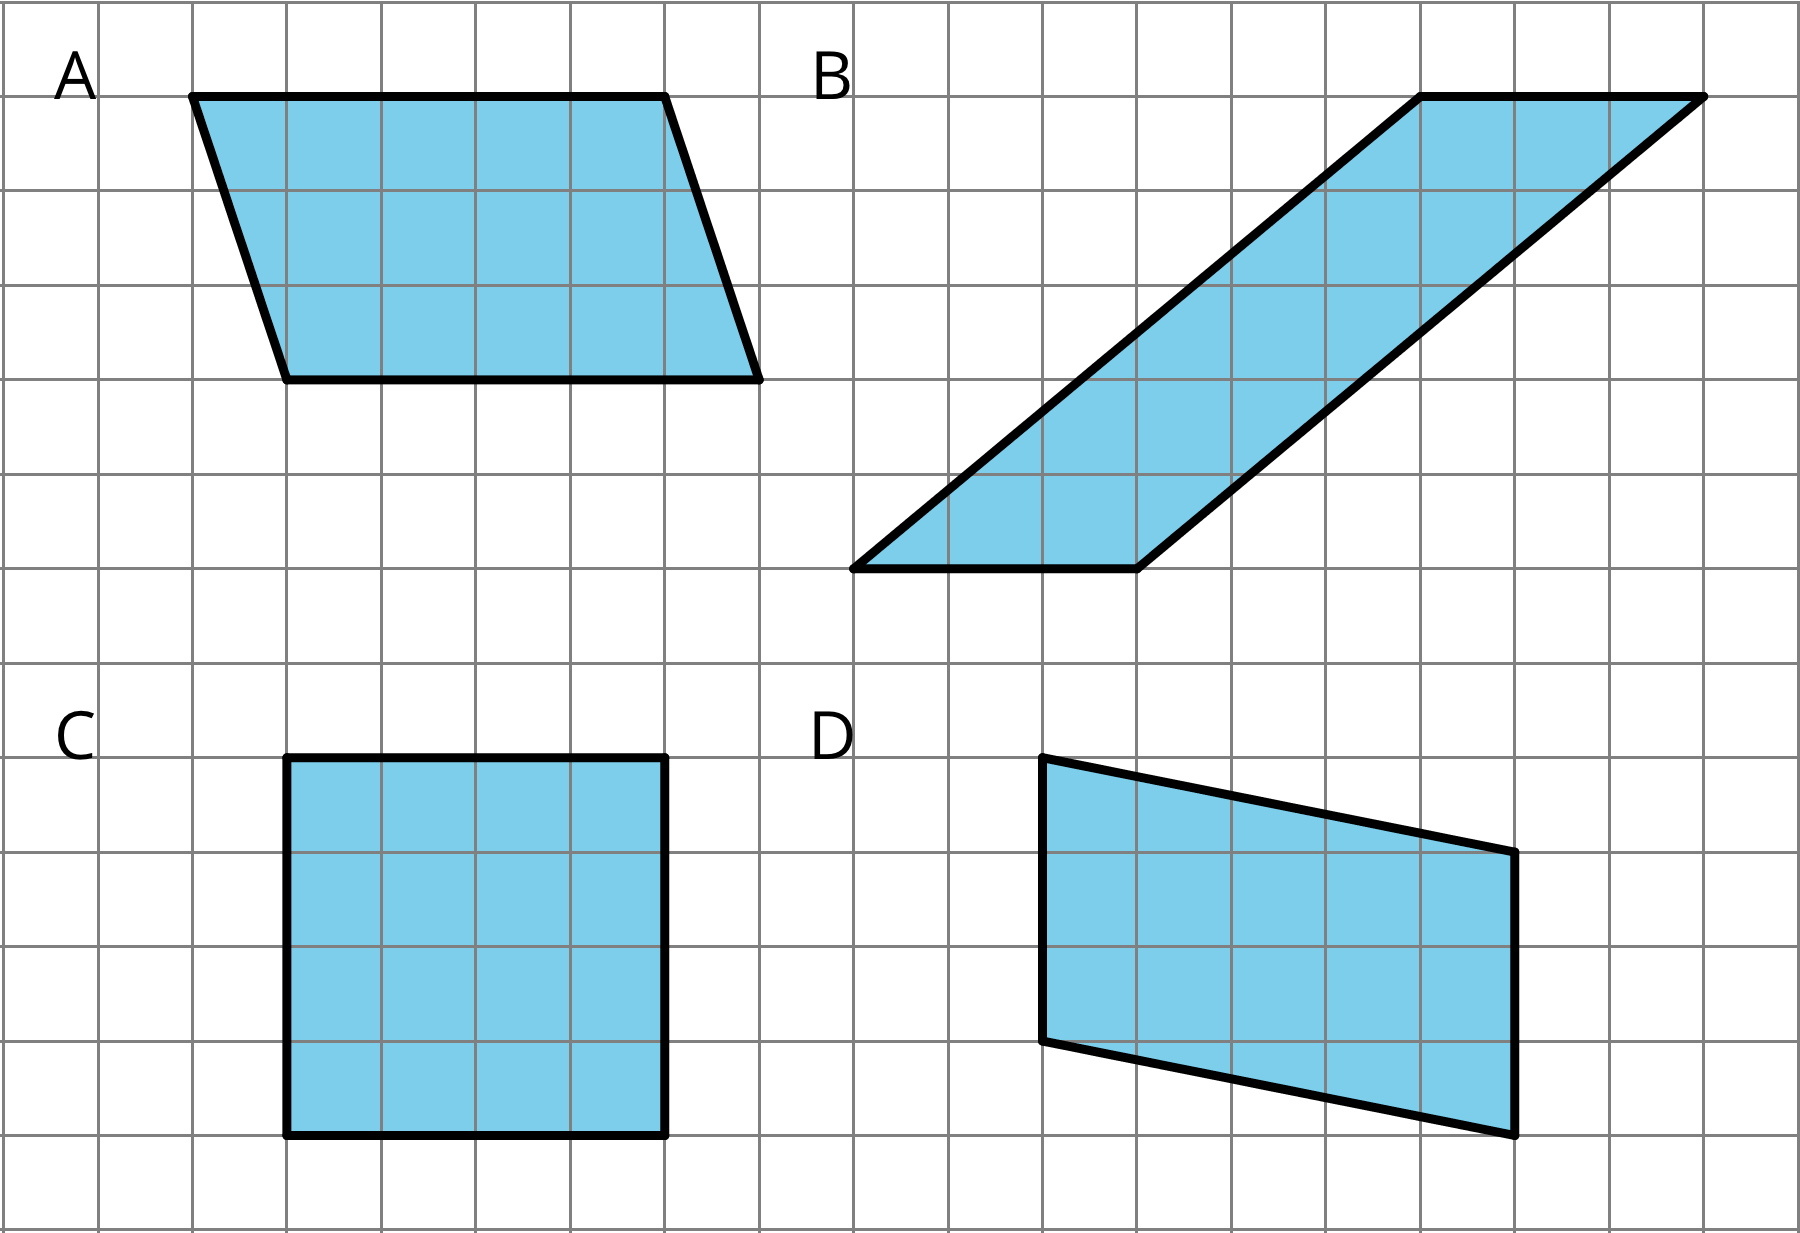 Four parallelograms, labeled A, B, C, and D. In figure A, the top and bottom are each 5 units long, and the sides descend 3 units and move right 1 unit. In figure B, the top and bottom are each 3 units long and the left and right sides ascend 5 units while moving right 6 units. Figure C is a square of 4 units on each side. In figure D, the left and right sides ascend 3 units, and the top and bottom descend 1 unit as they move right 5 units.